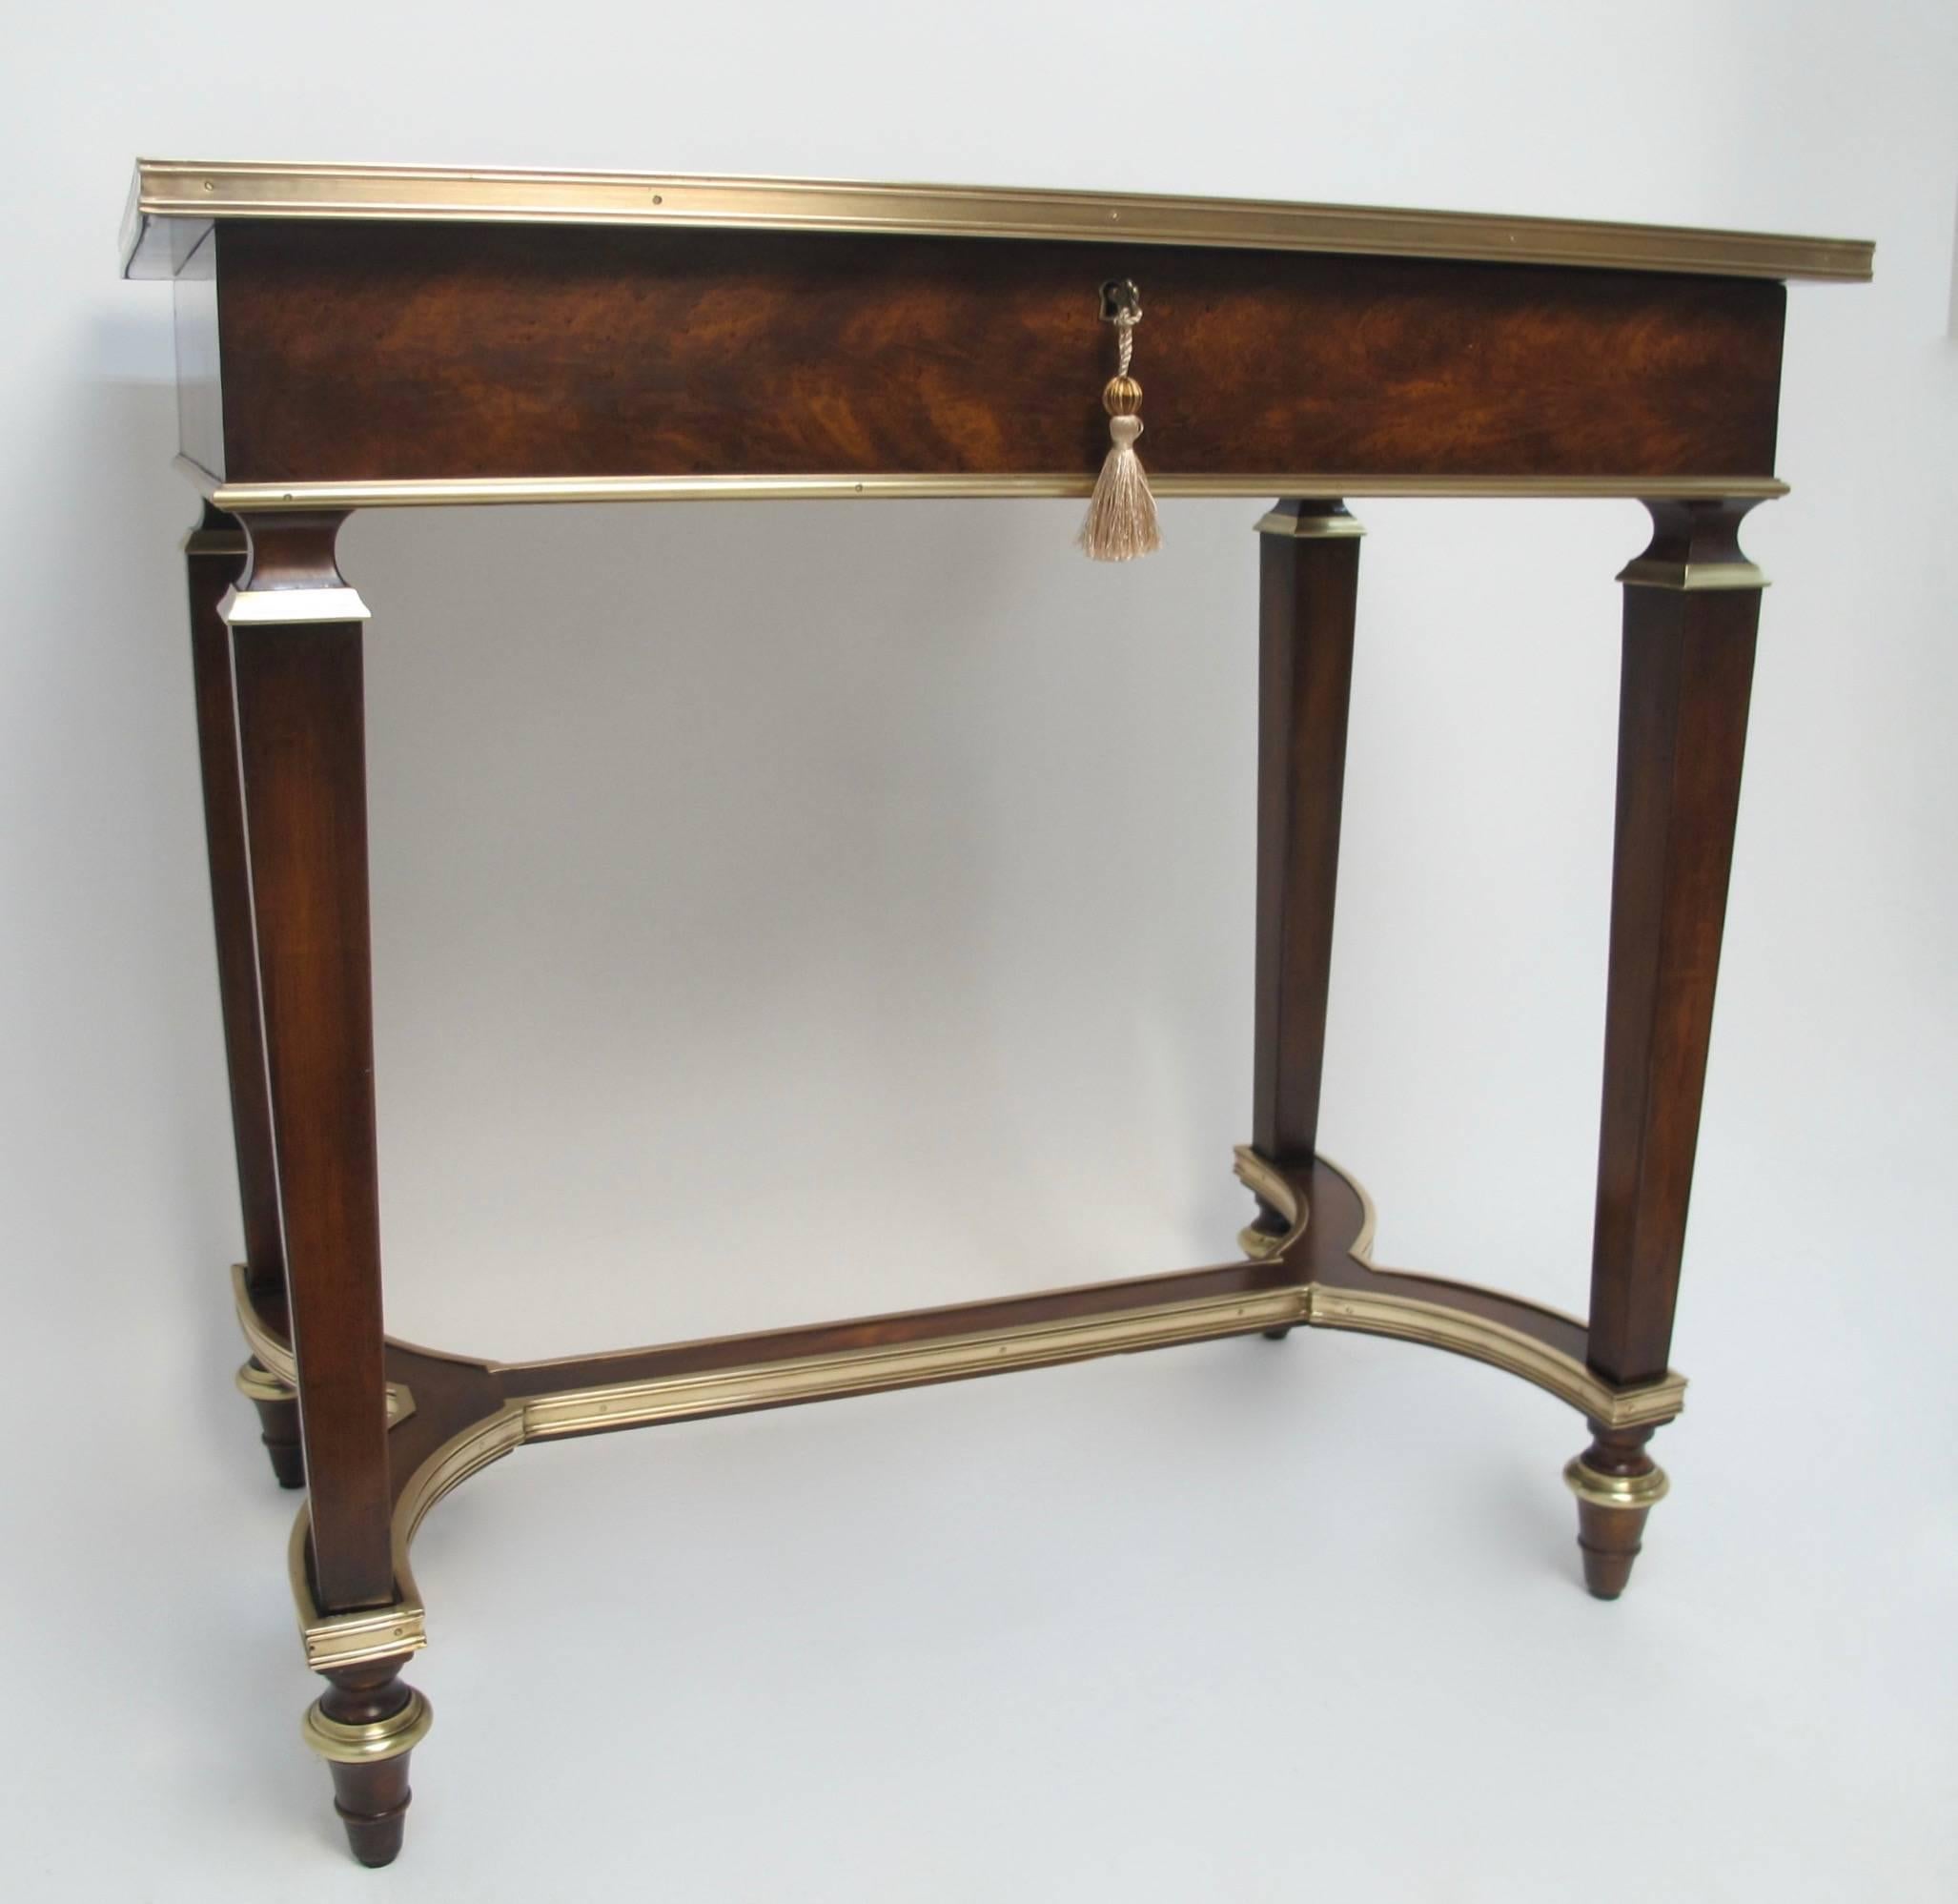 A fine quality mahogany with bronze trim vitrine.  Beveled Glass top opens to a velvet lined interior, and working key. England, Early 20th century.